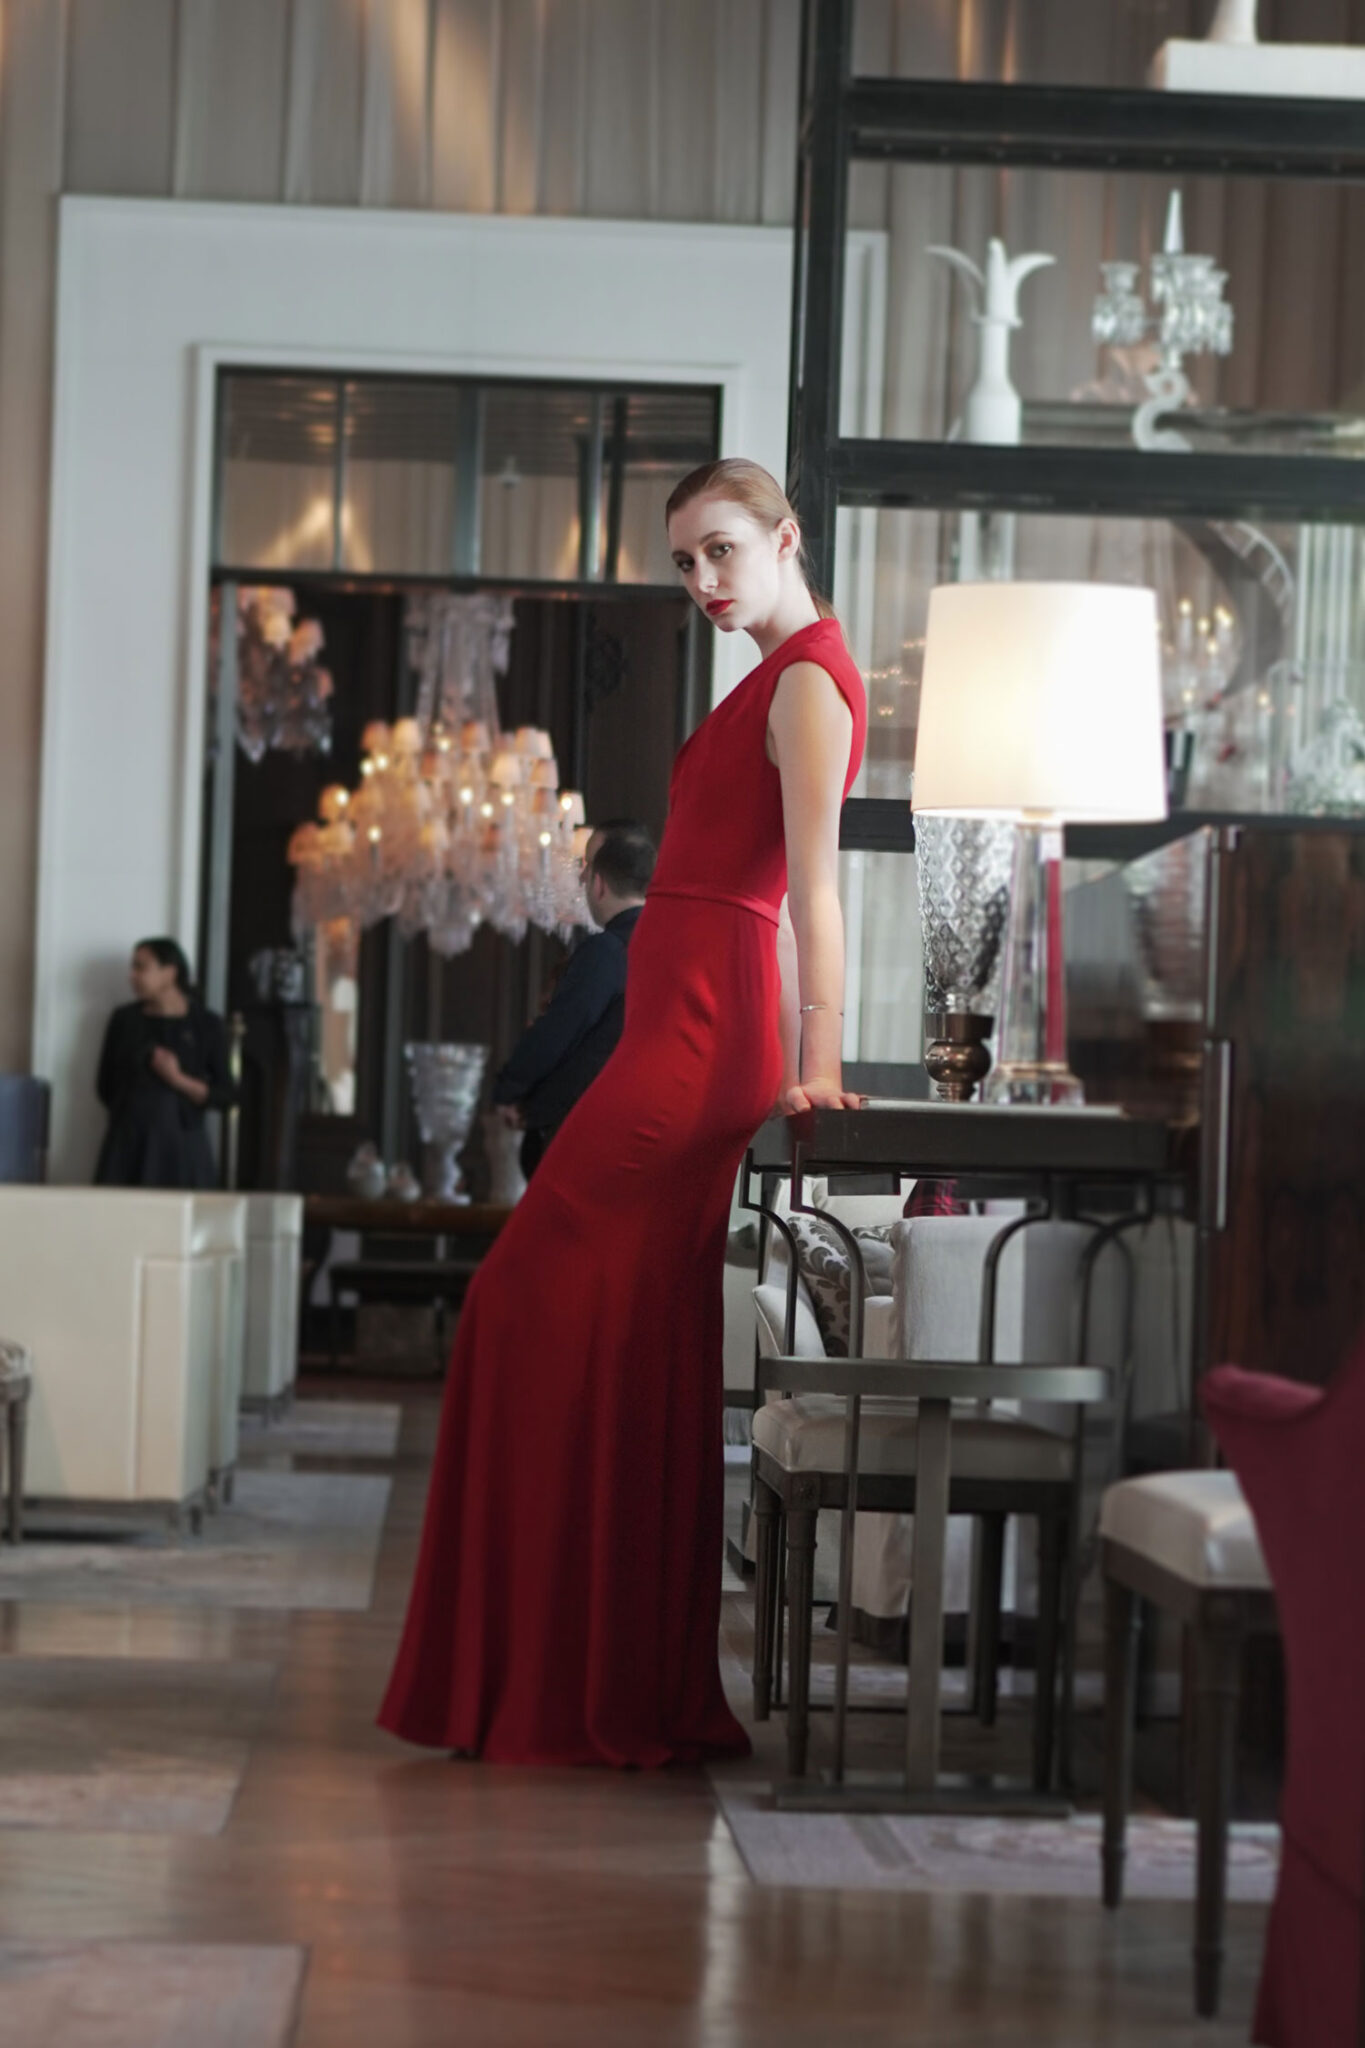 Promises Look 7 - Special red dress ready to dazzle in brunch - Verdin New York